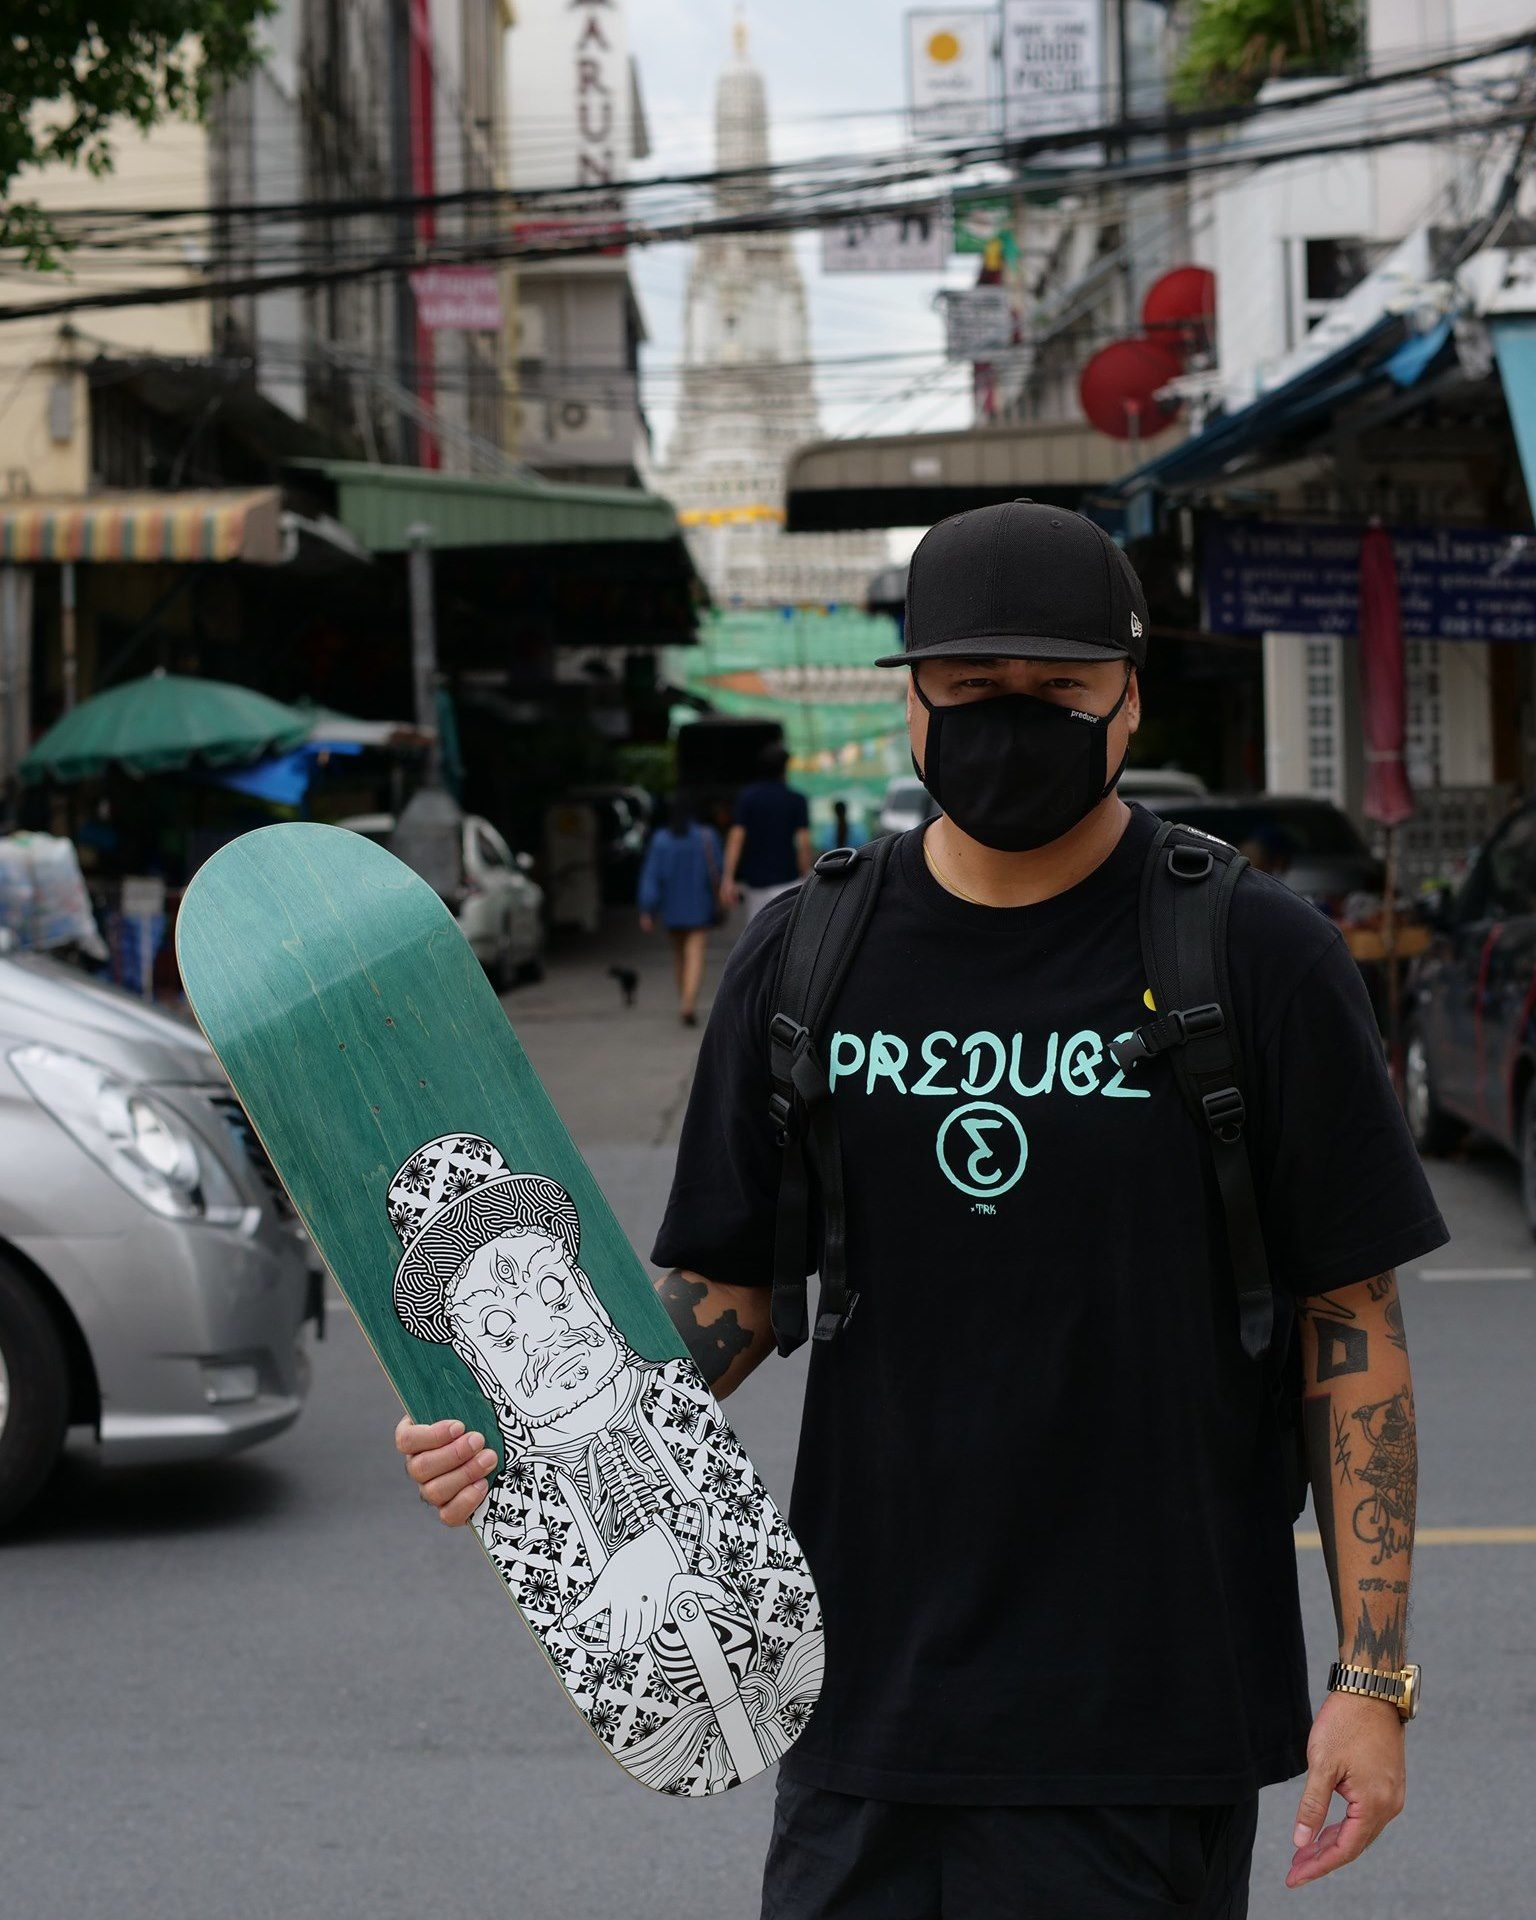 Stone Giants Deck Series By TR For Preduce Skateboards 5